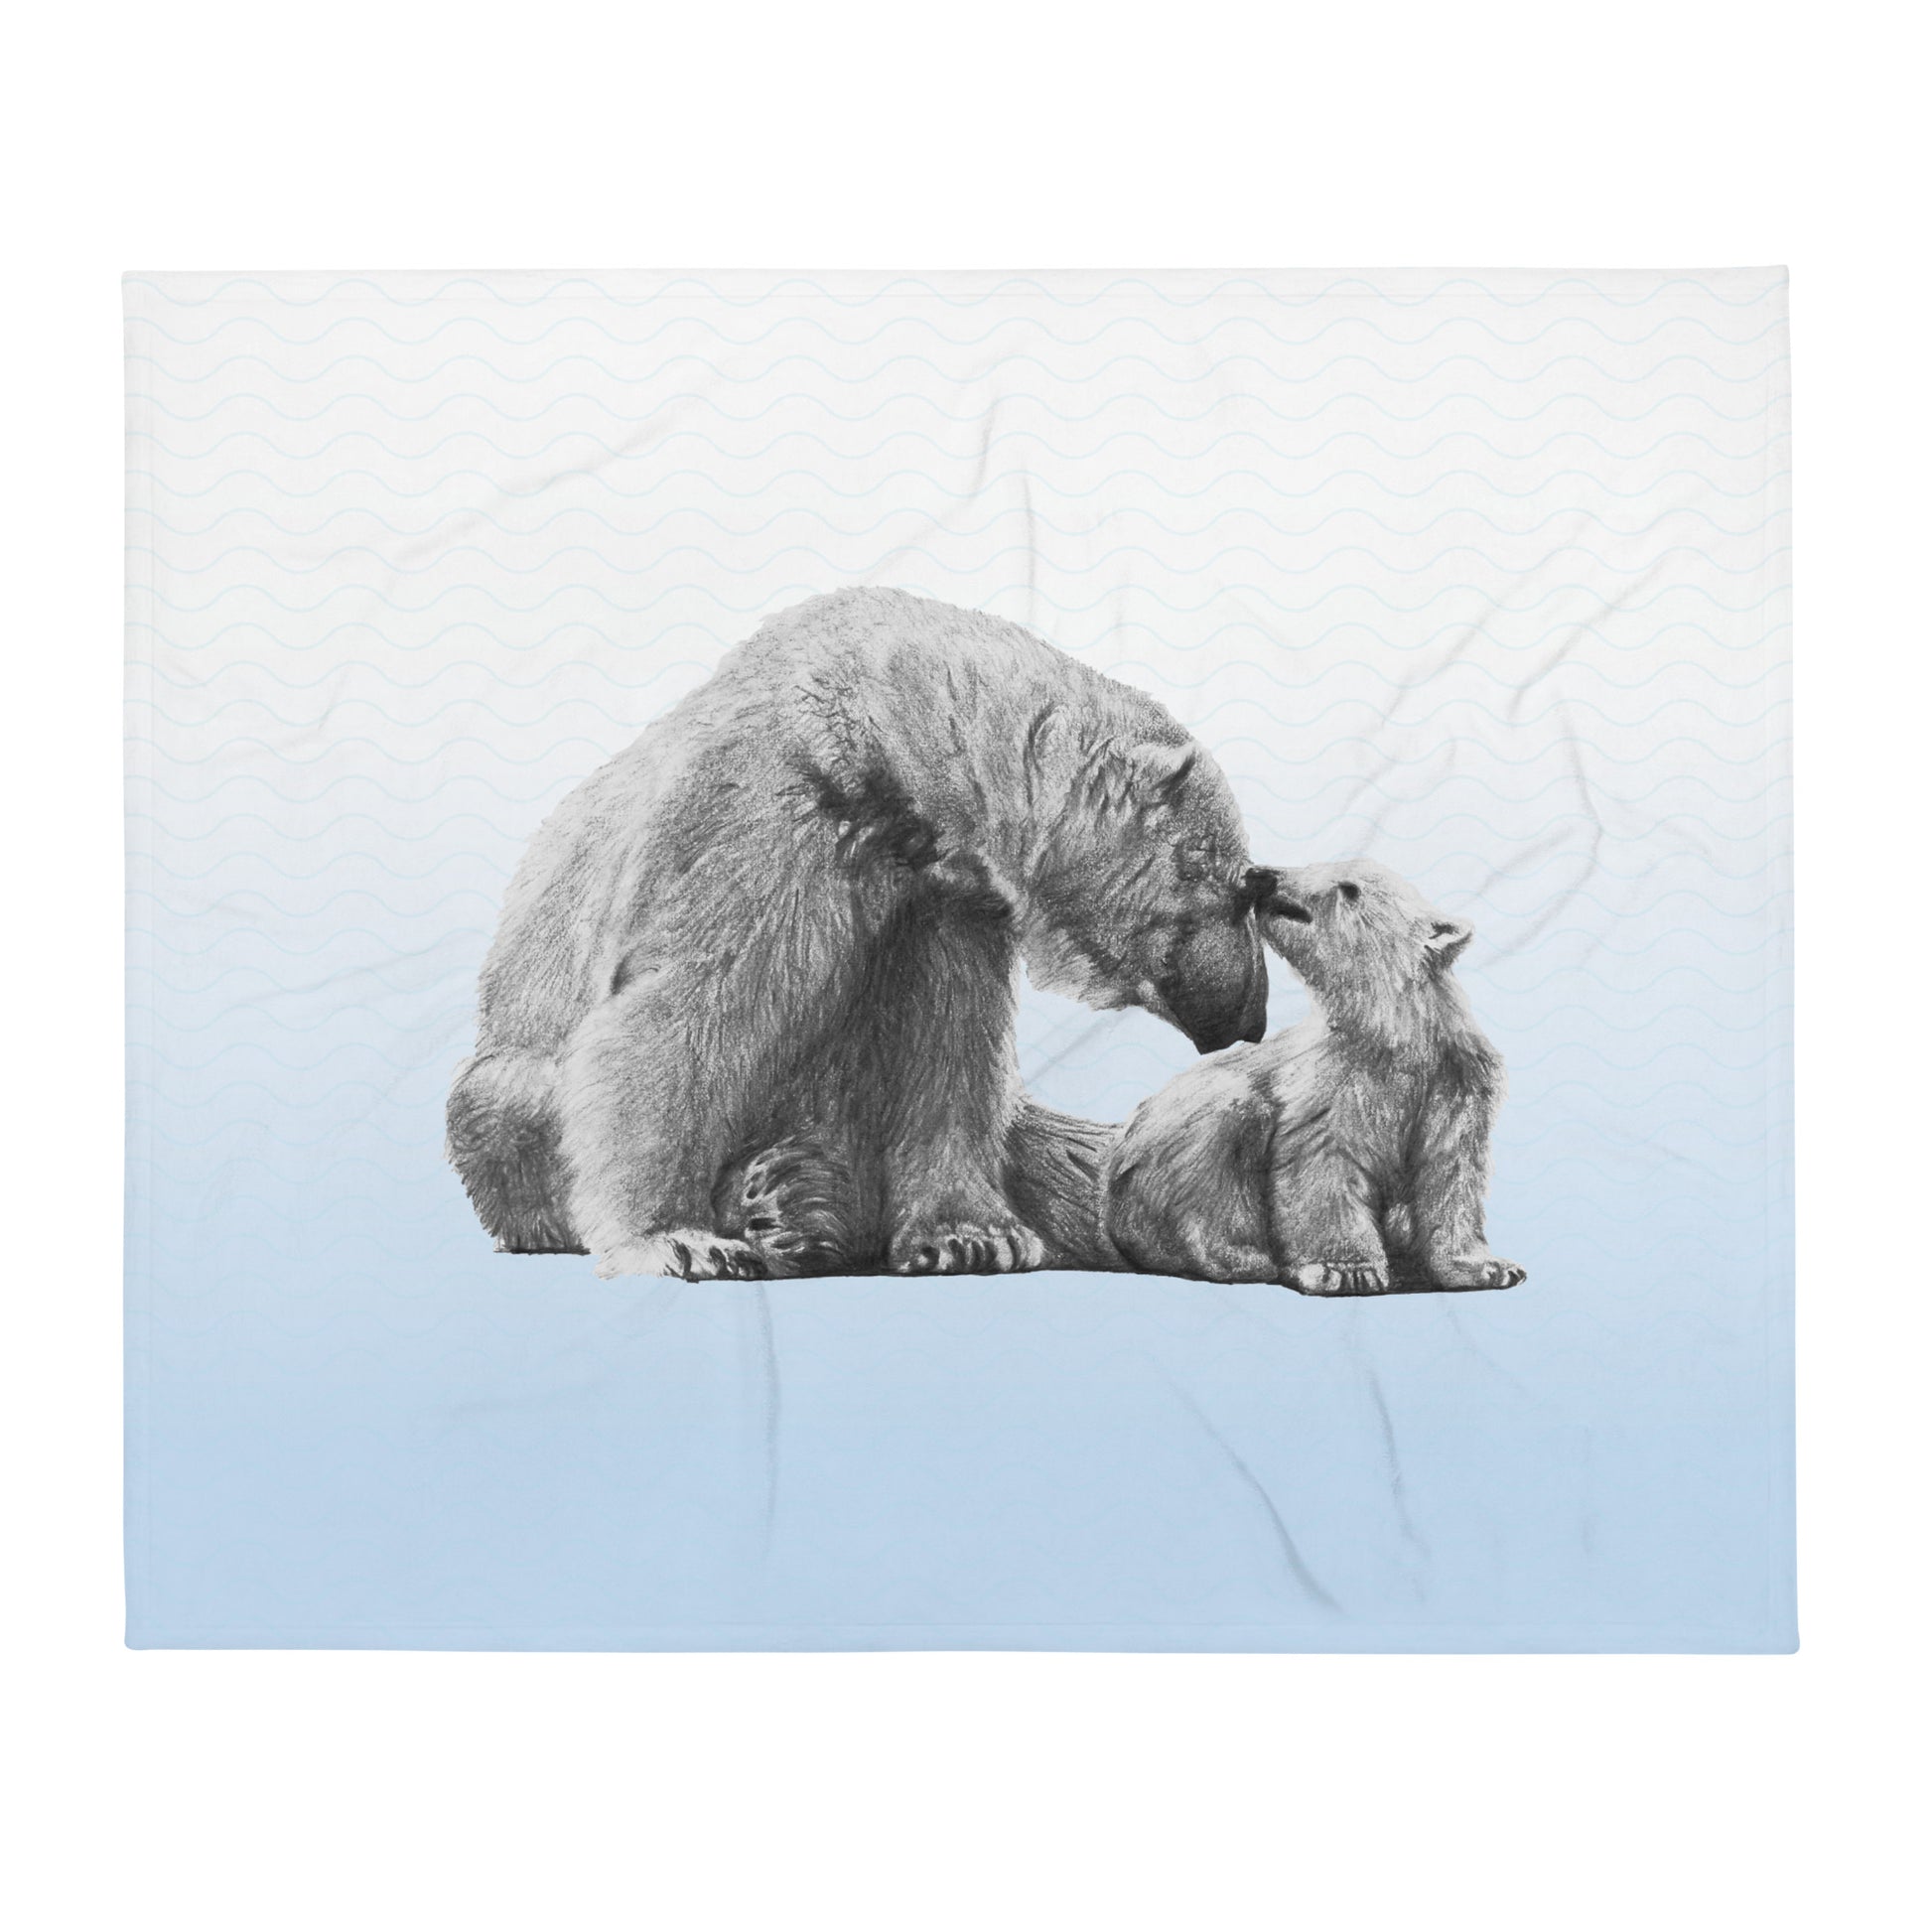 These "Polar Bear Throw Blanket" are from a drawing of mine created with a graphite pencil. It has been digitally optimized and transferred to a 100% Polyester throw blanket.